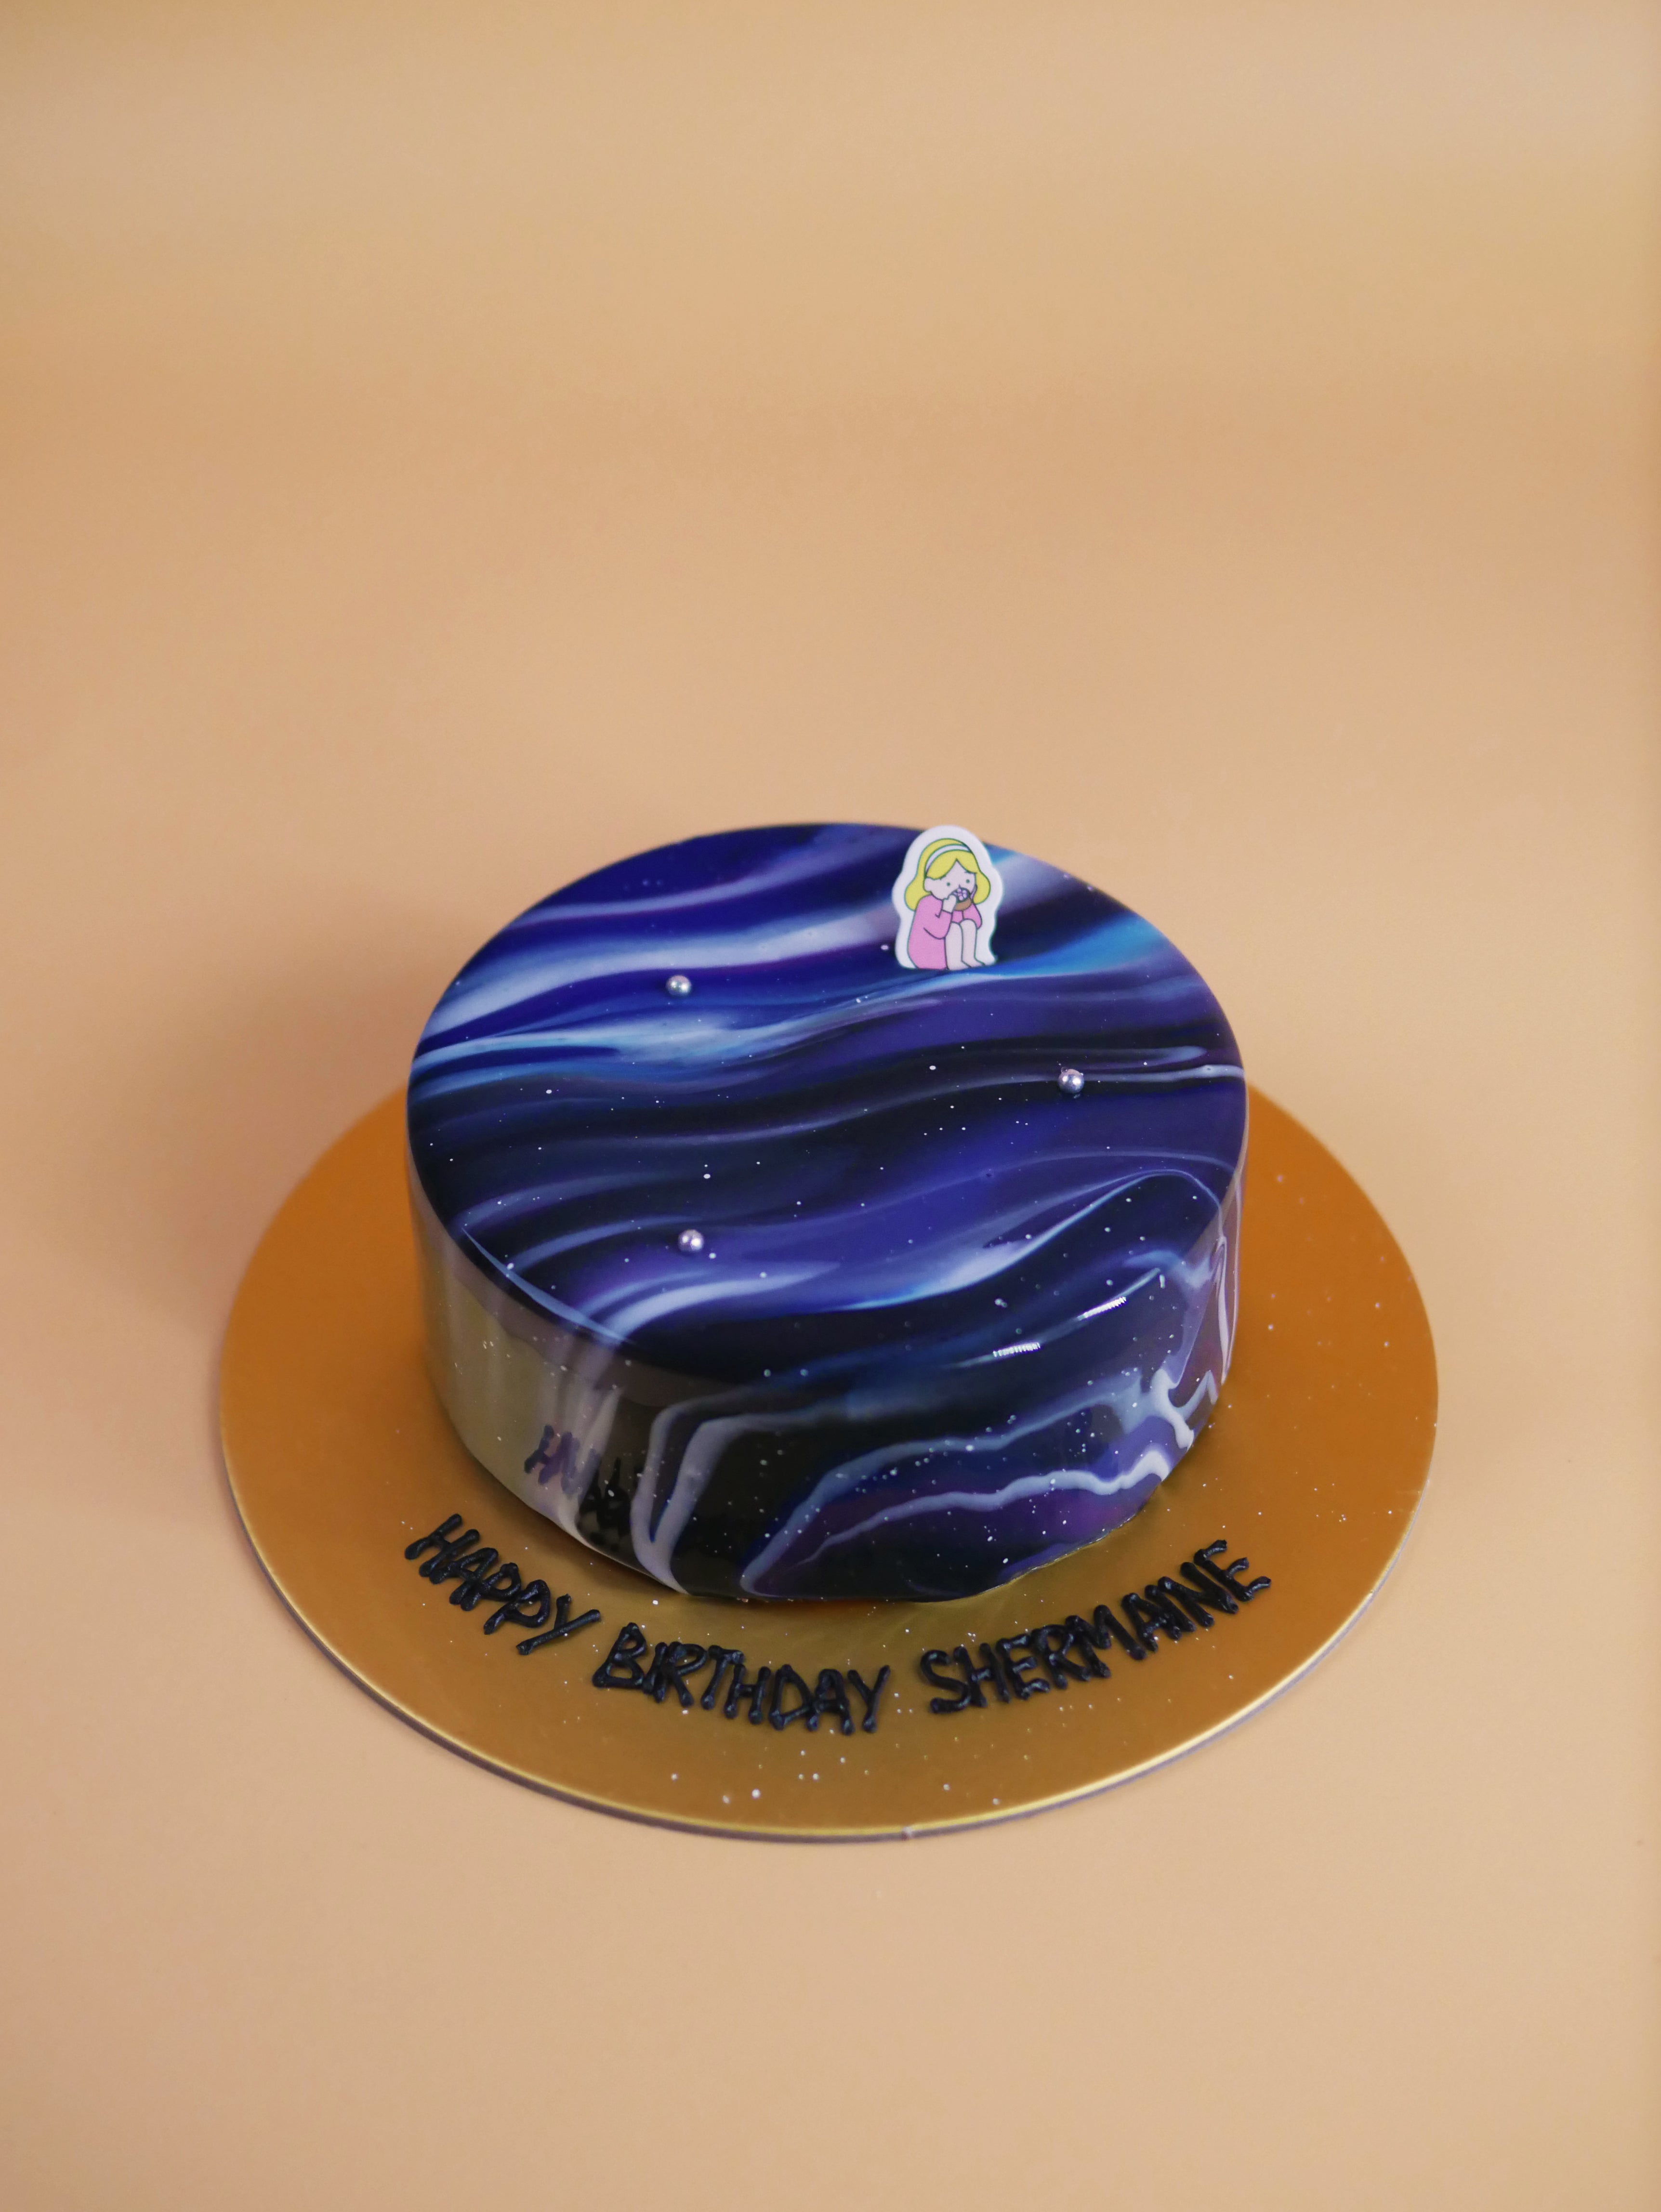 15 Amazing Space Themed Birthday Cake Ideas (Out Of This World) | Galaxy  cake, Themed birthday cakes, Pretty birthday cakes